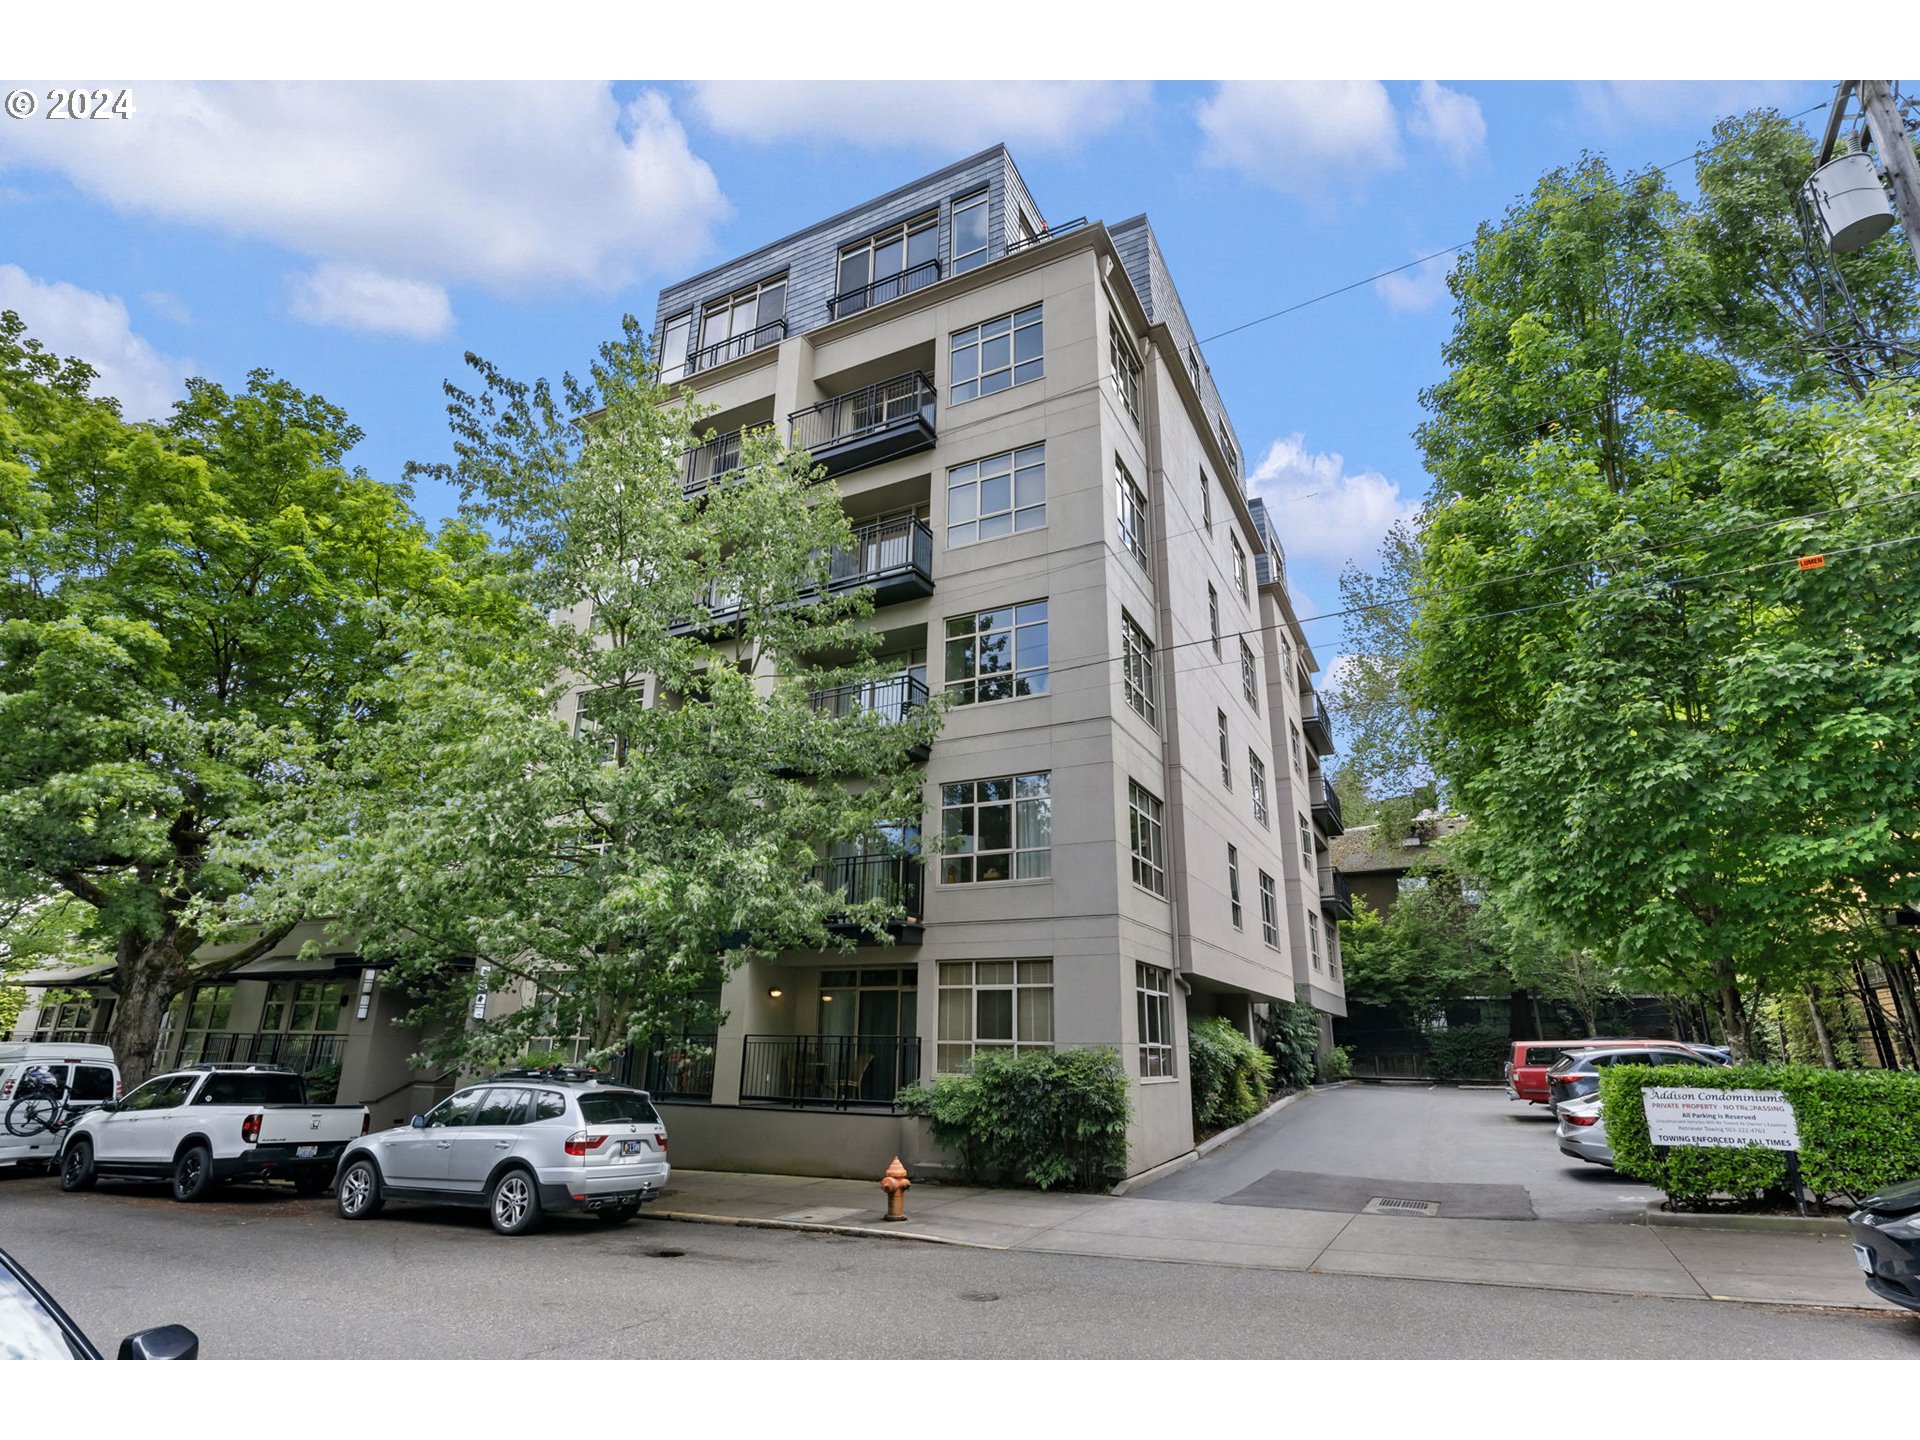 1930 NW IRVING ST Unit 101, Portland OR 97209